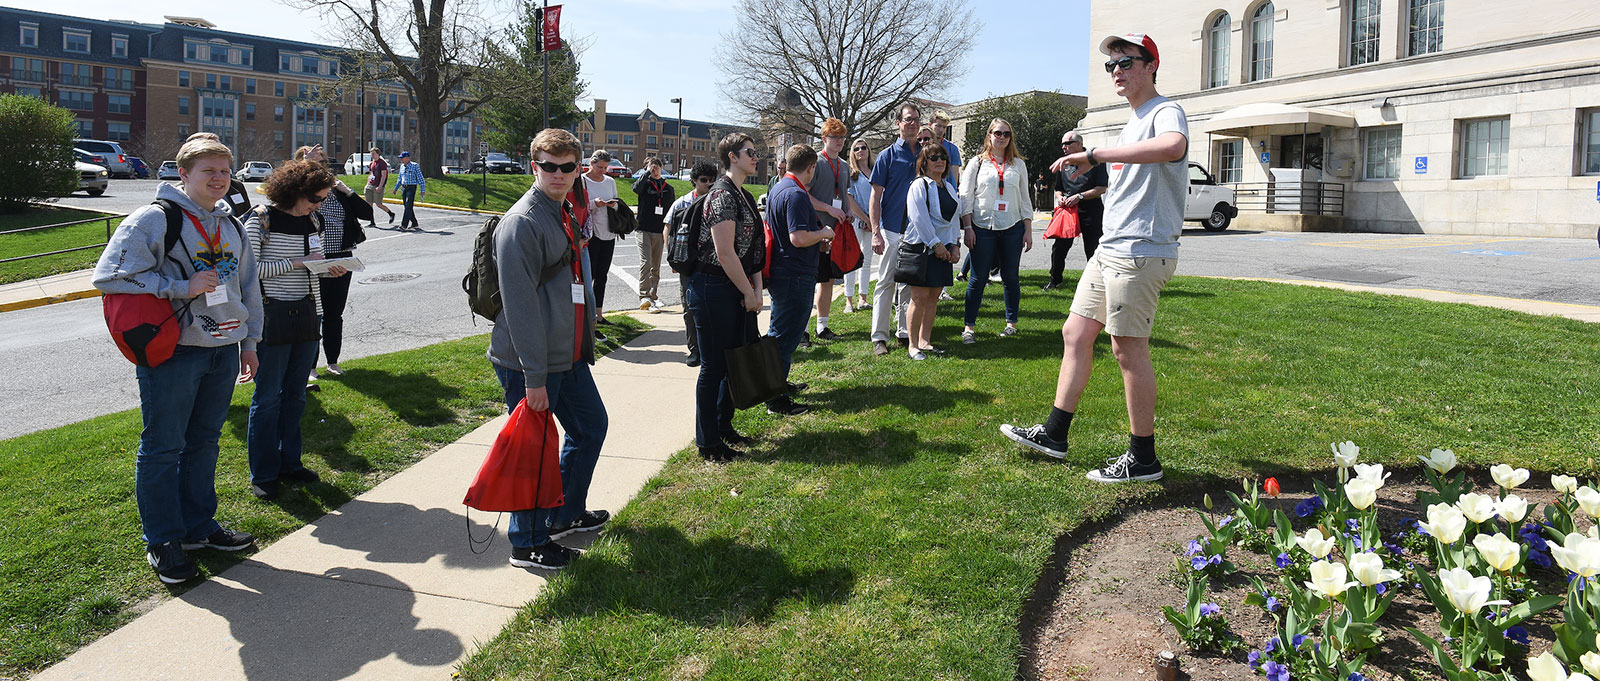 Admitted students touring campus